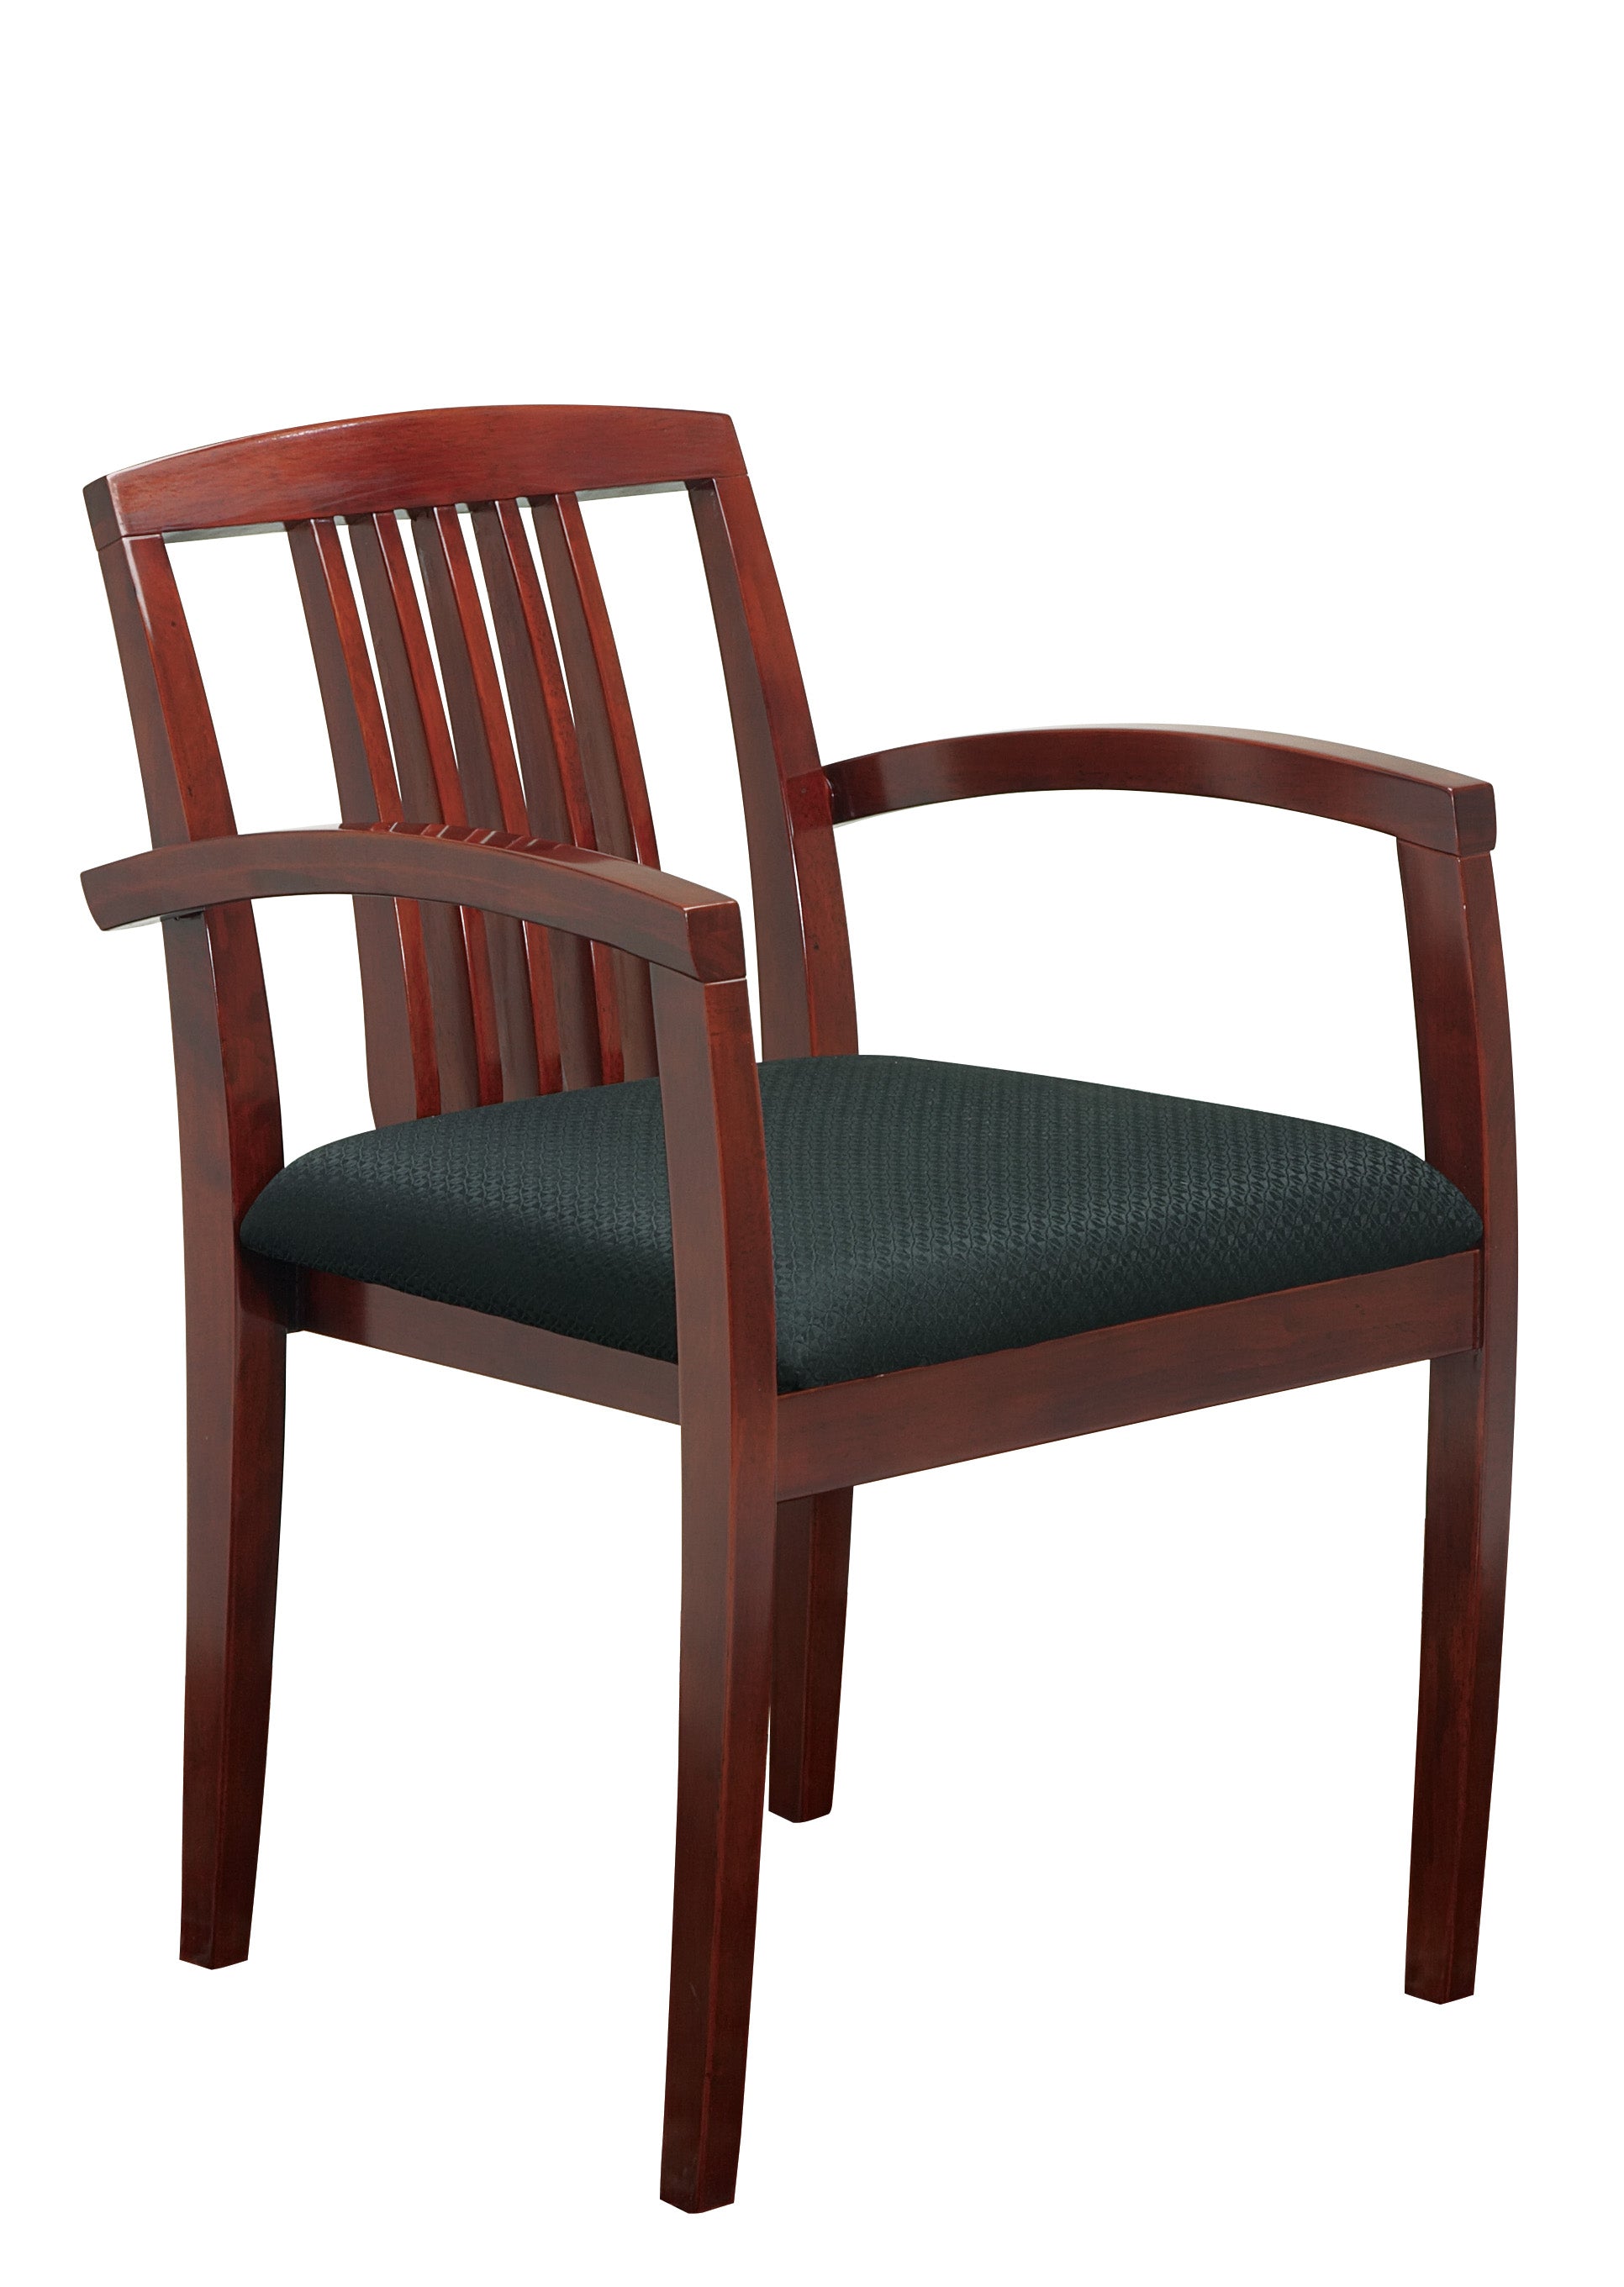 SON-992 - Sonoma Cherry Finish Guest Chair, Slat Back by Office Star (2 Pack)